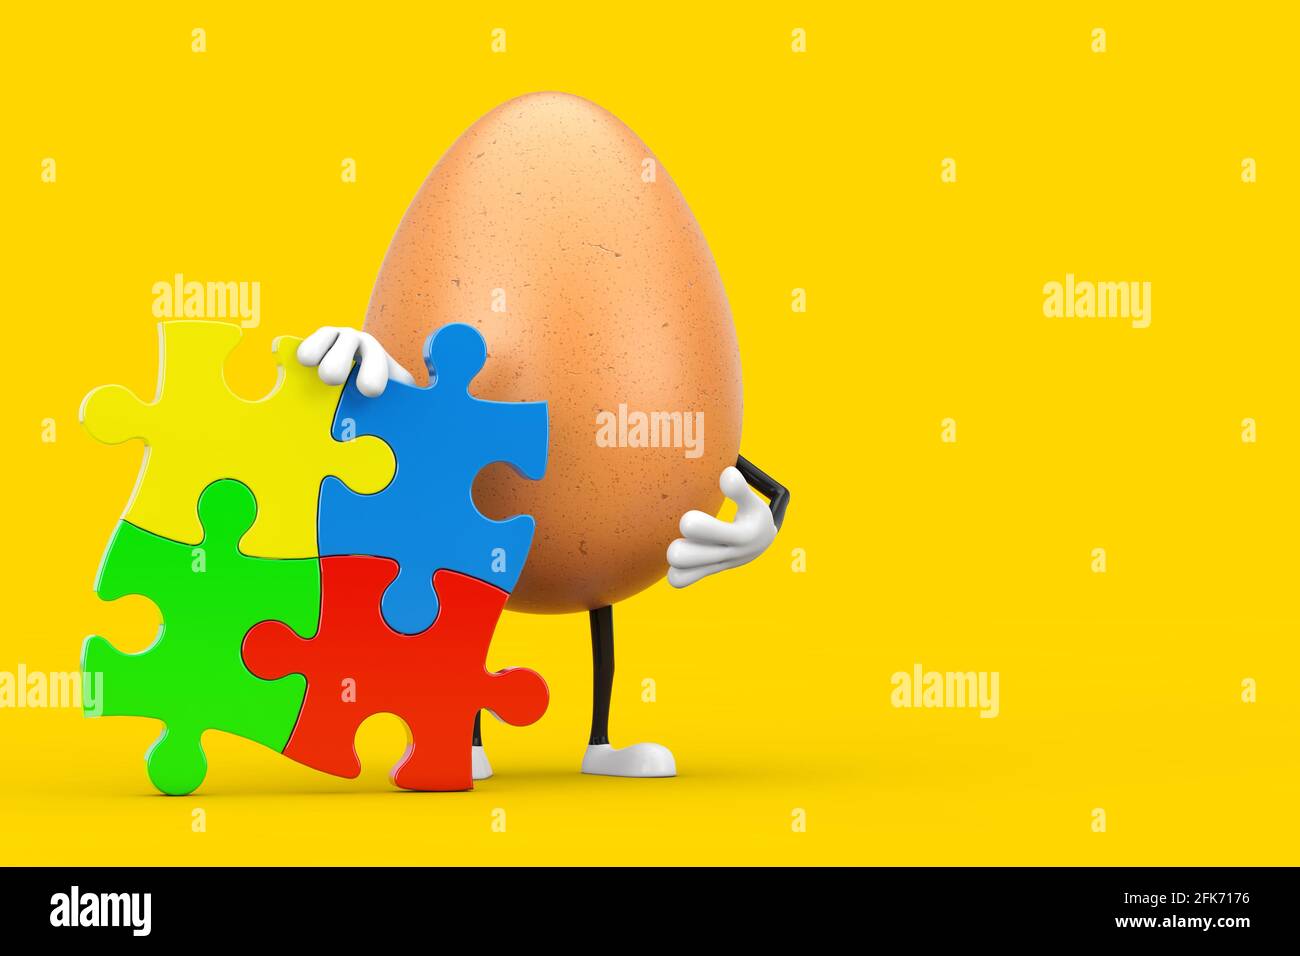 Brown Chicken Egg Person Character Mascot with Four Pieces of Colorful Jigsaw Puzzle on a yellow background. 3d Rendering Stock Photo